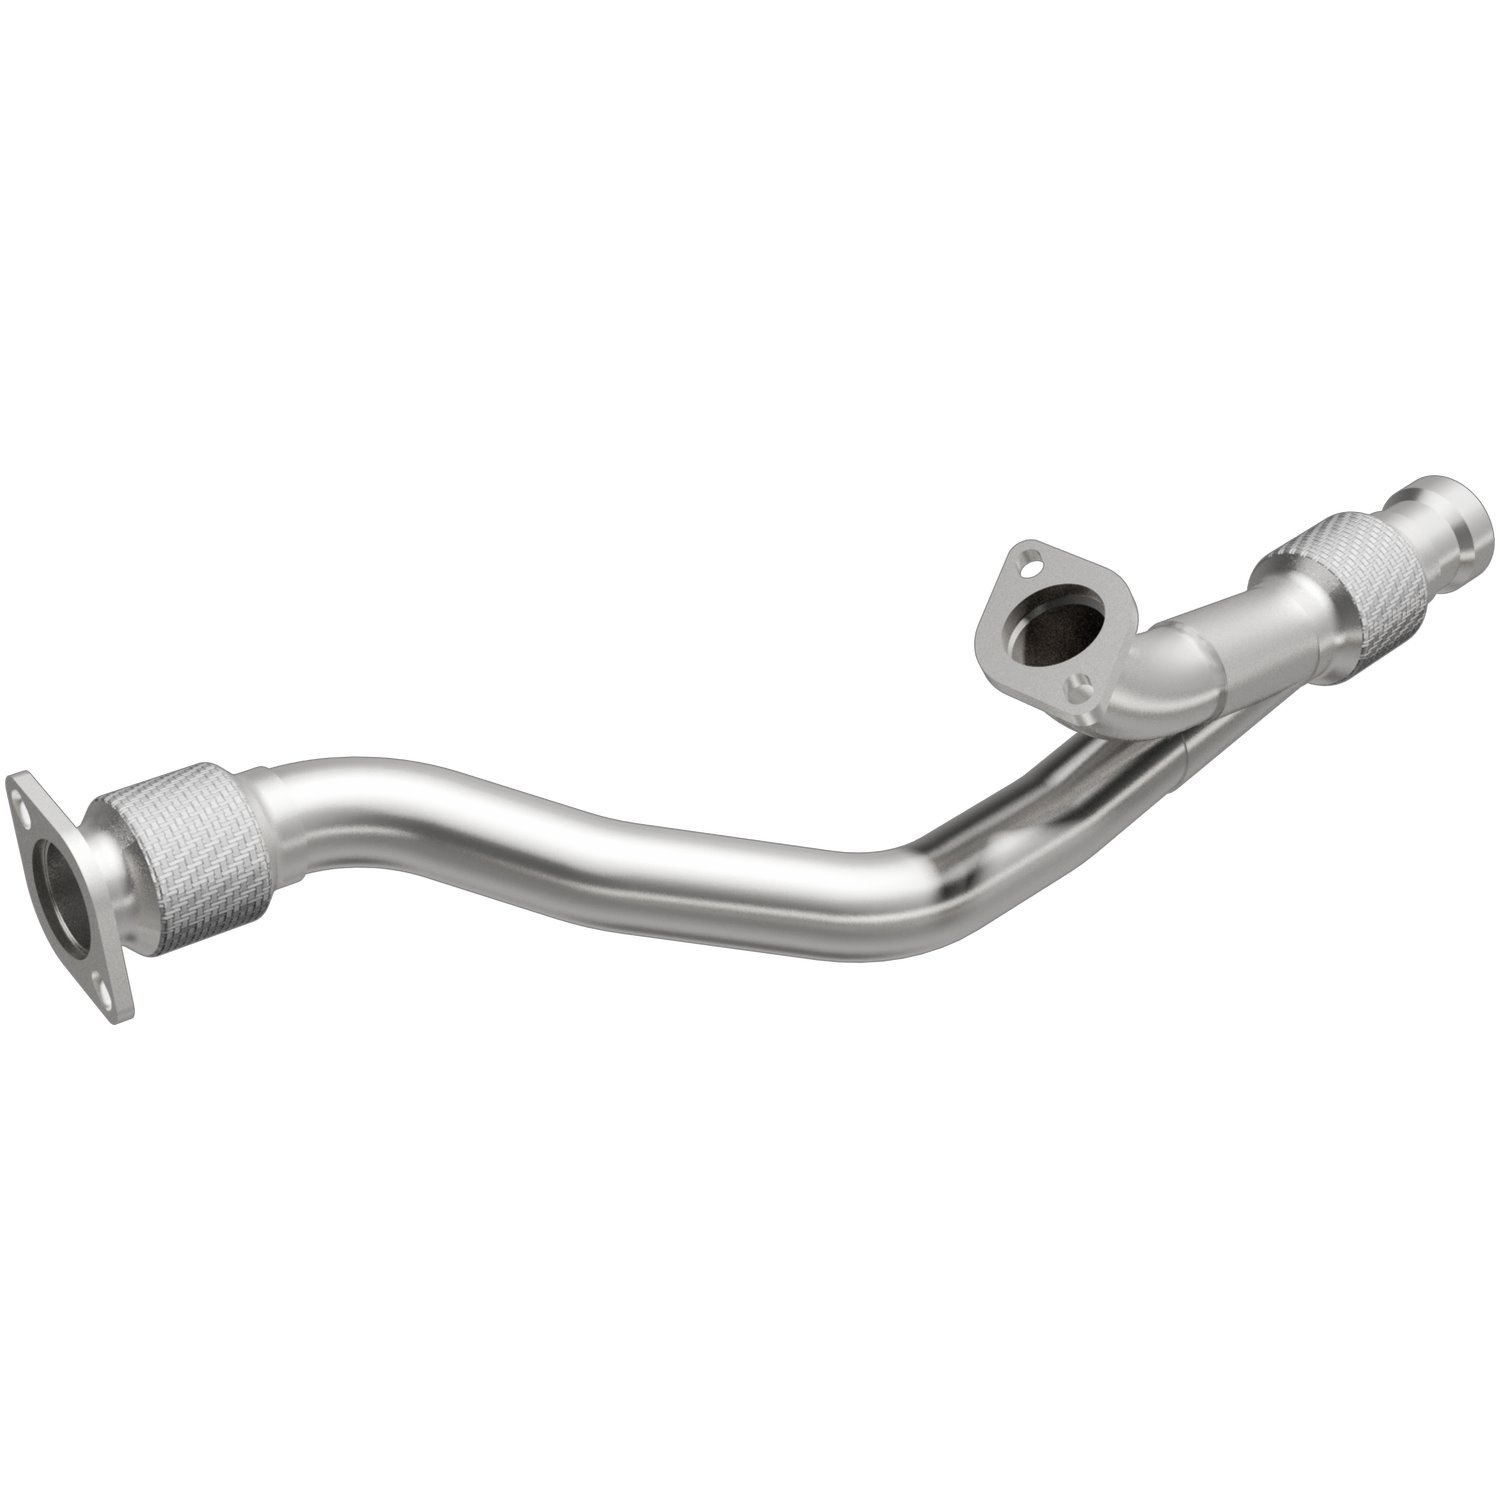 Direct-Fit Exhaust Y-Pipe, 2004-2004 Chevy Malibu 3.5L